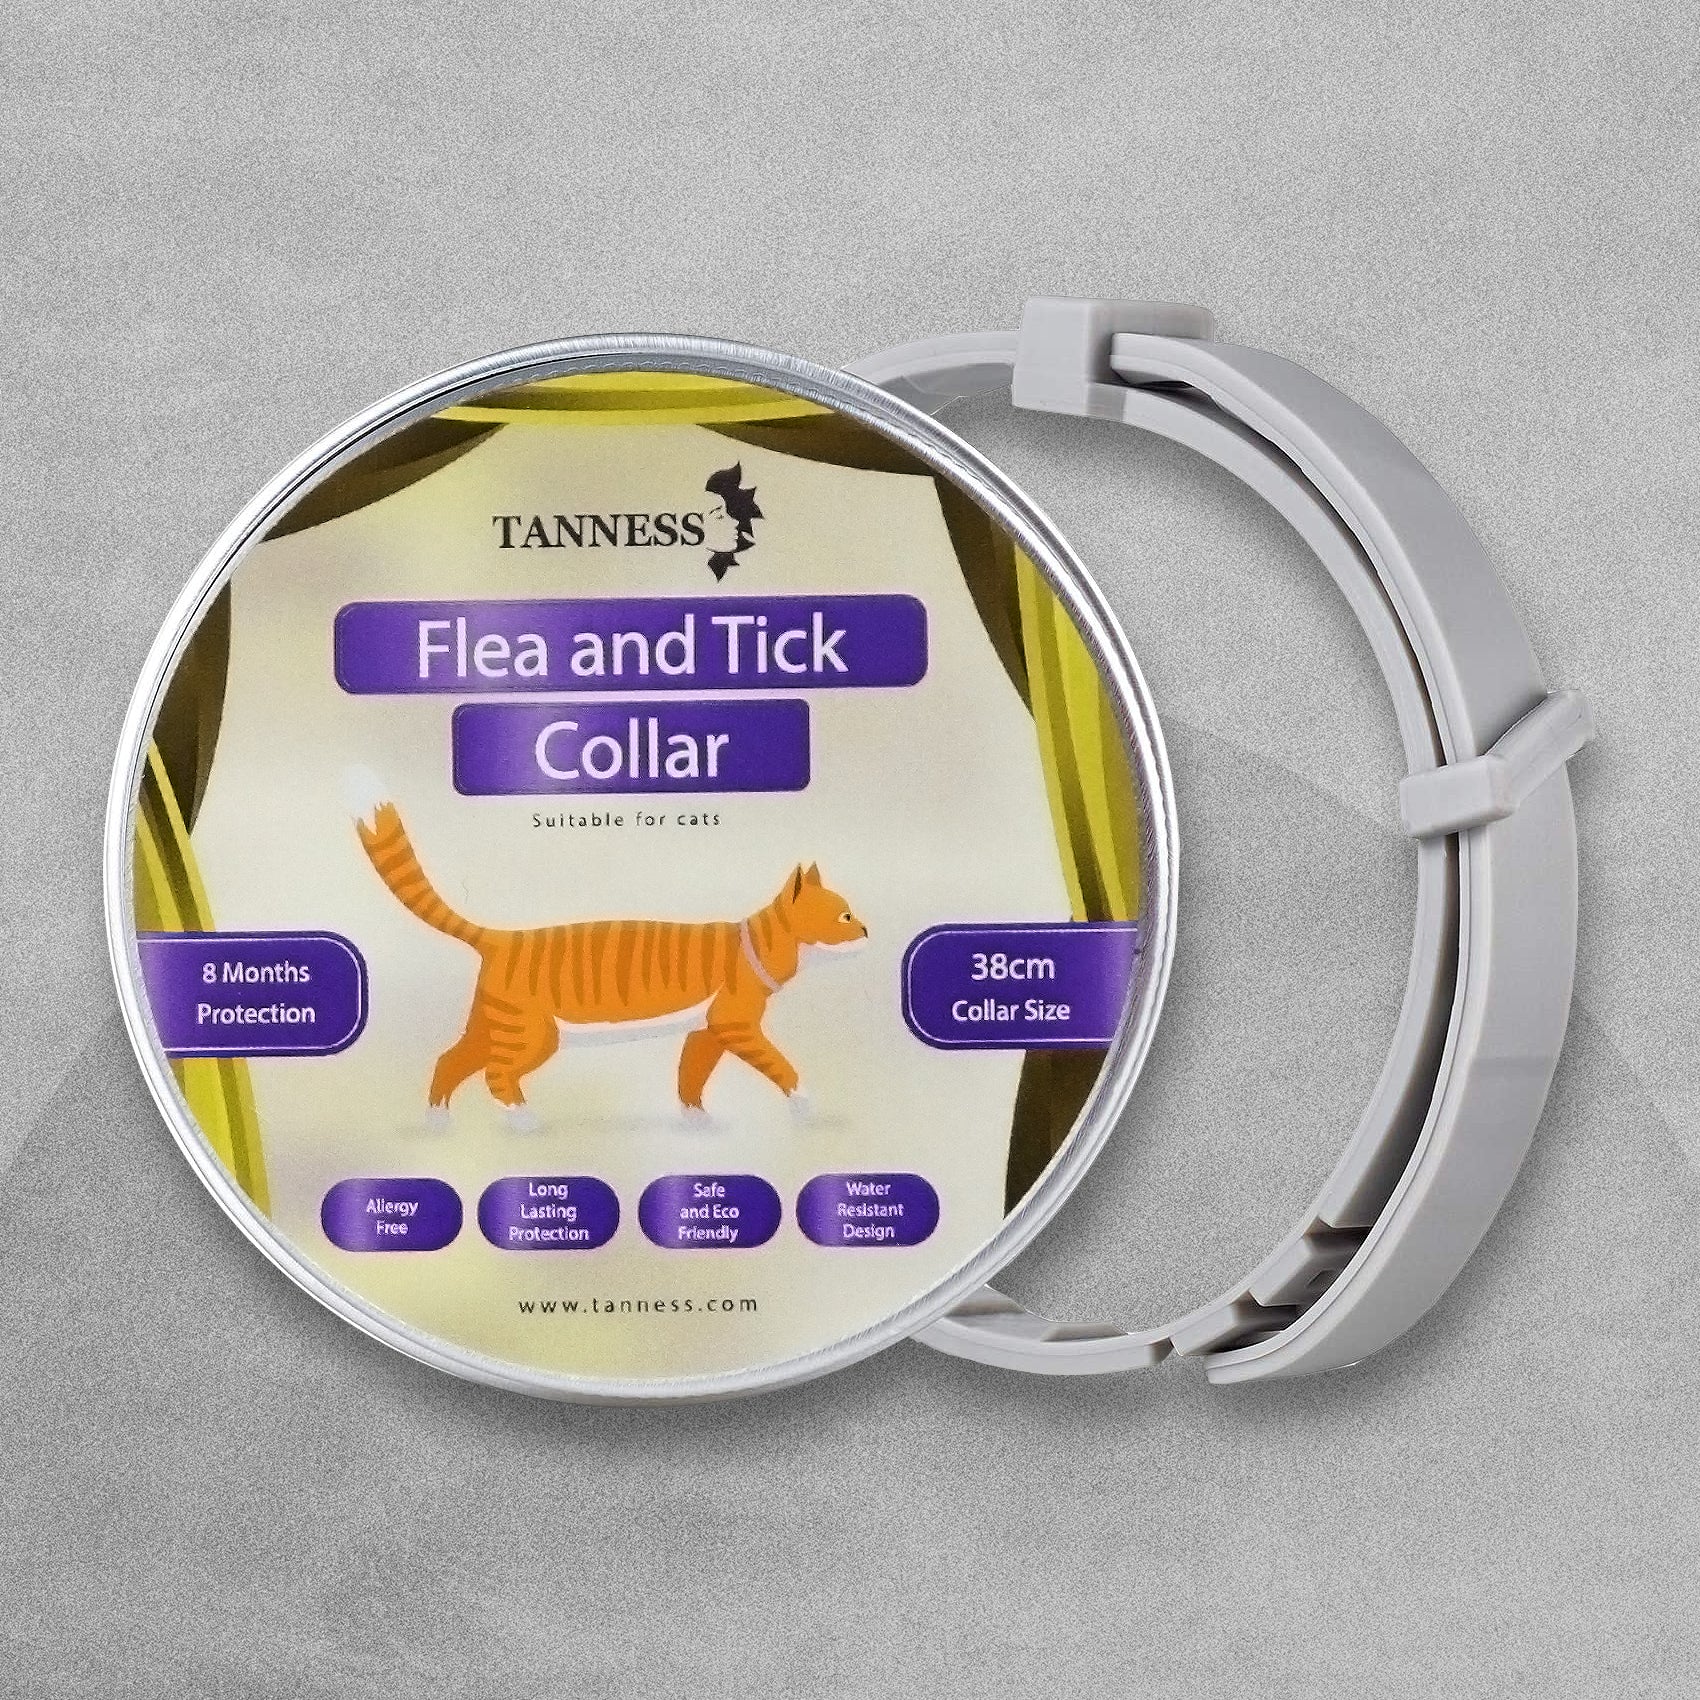 Tanness Flea and Tick Collar for Pets - Small 38cm